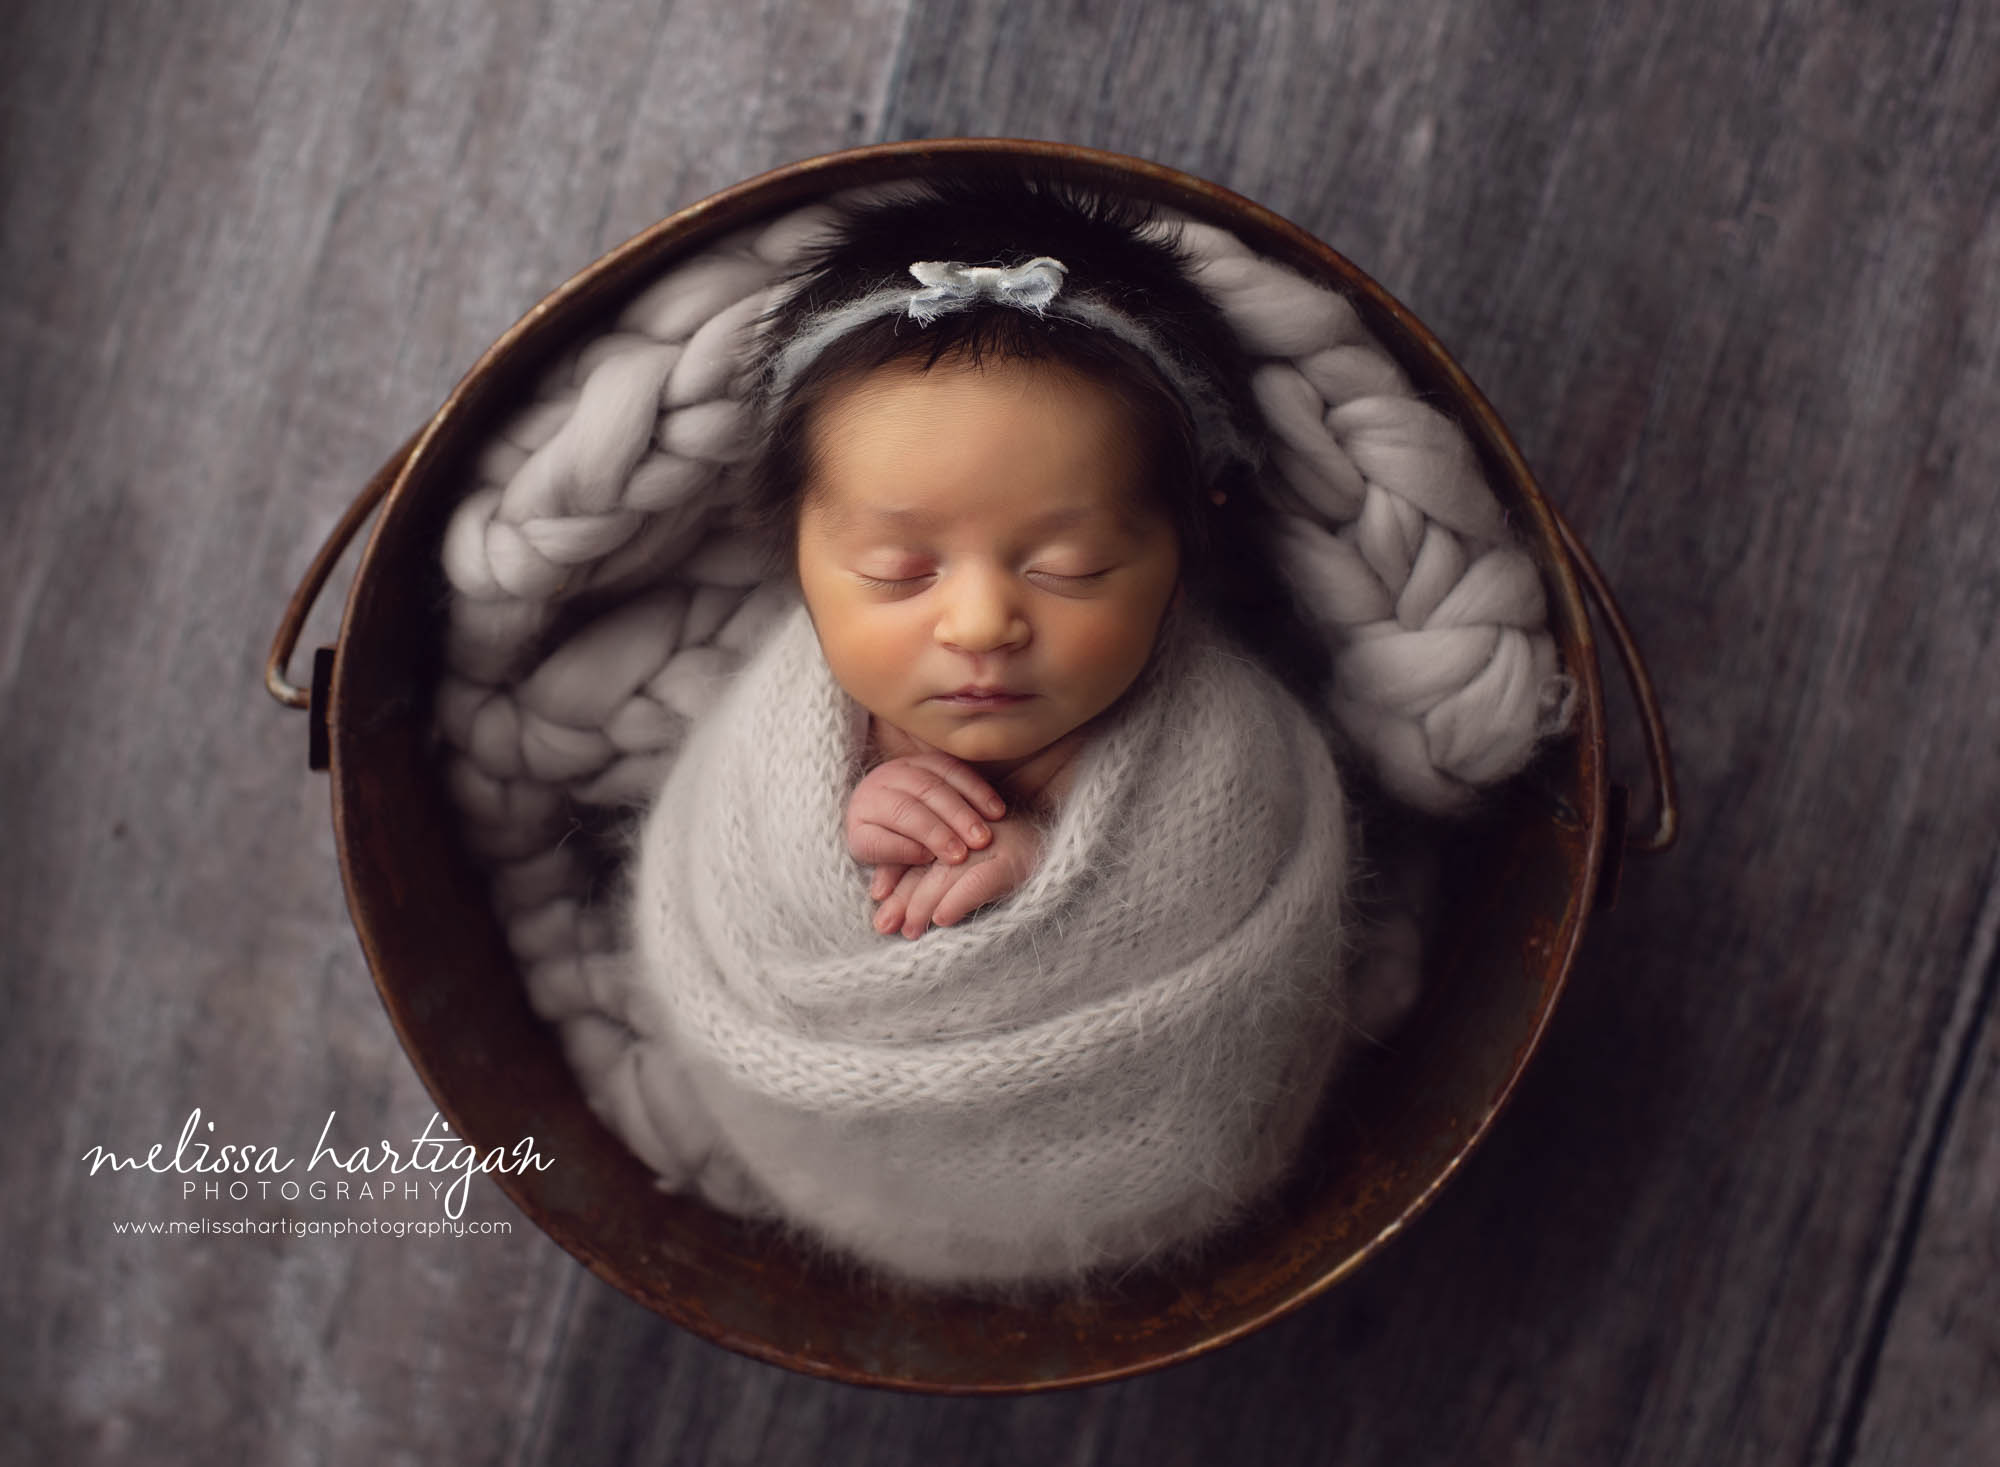 Baby girl wrapped potato sack wrap in bucket with gray layer